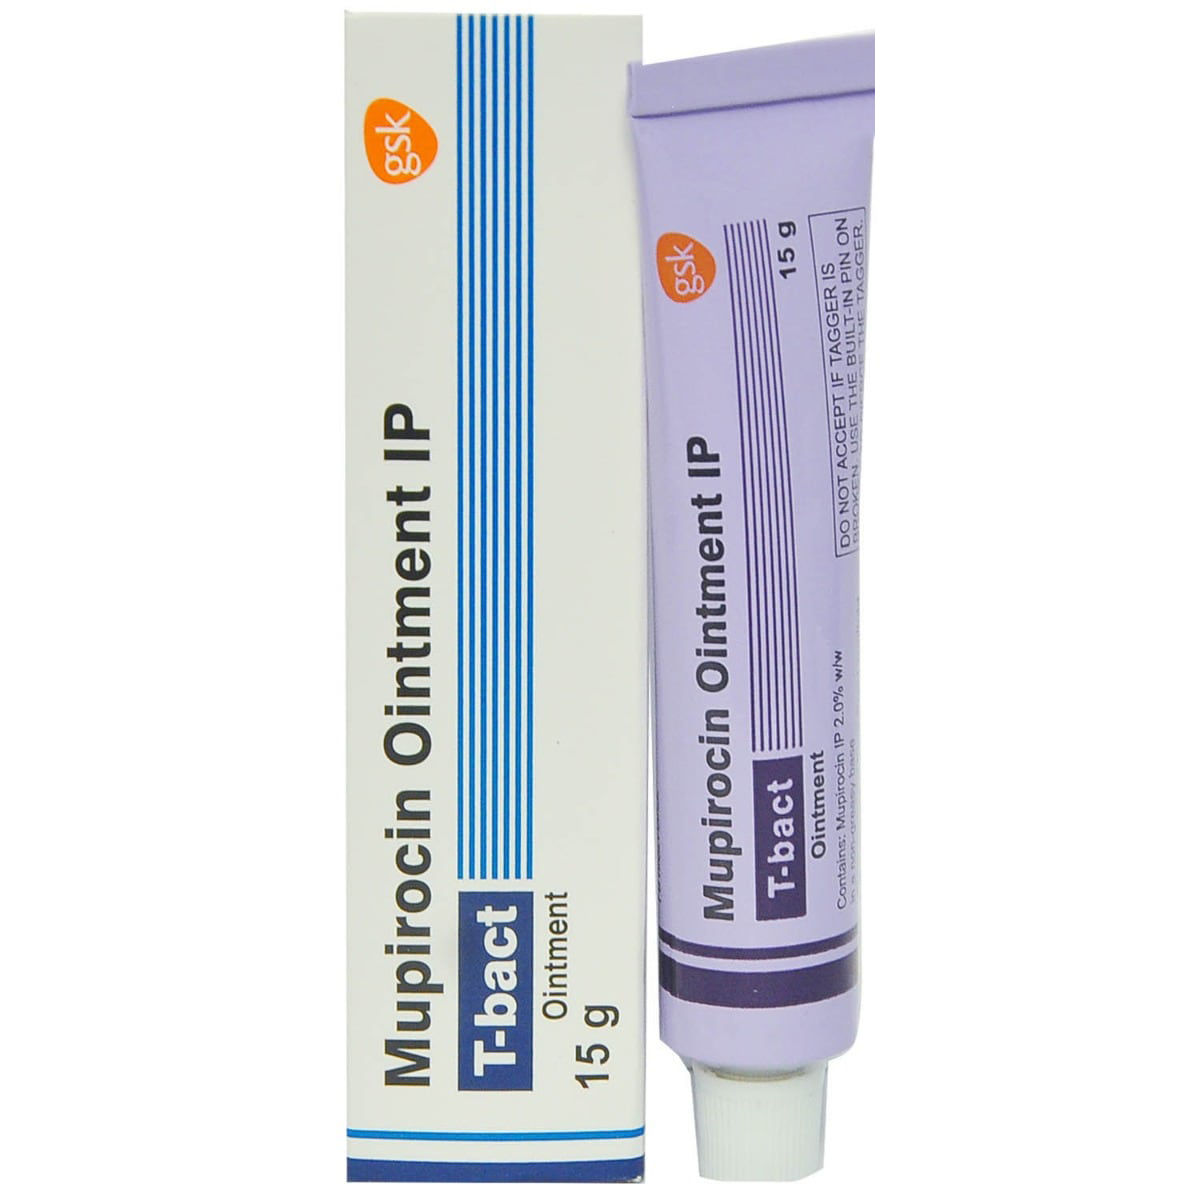 T Bact Ointment 15 gm Price, Uses, Side Effects, Composition ...